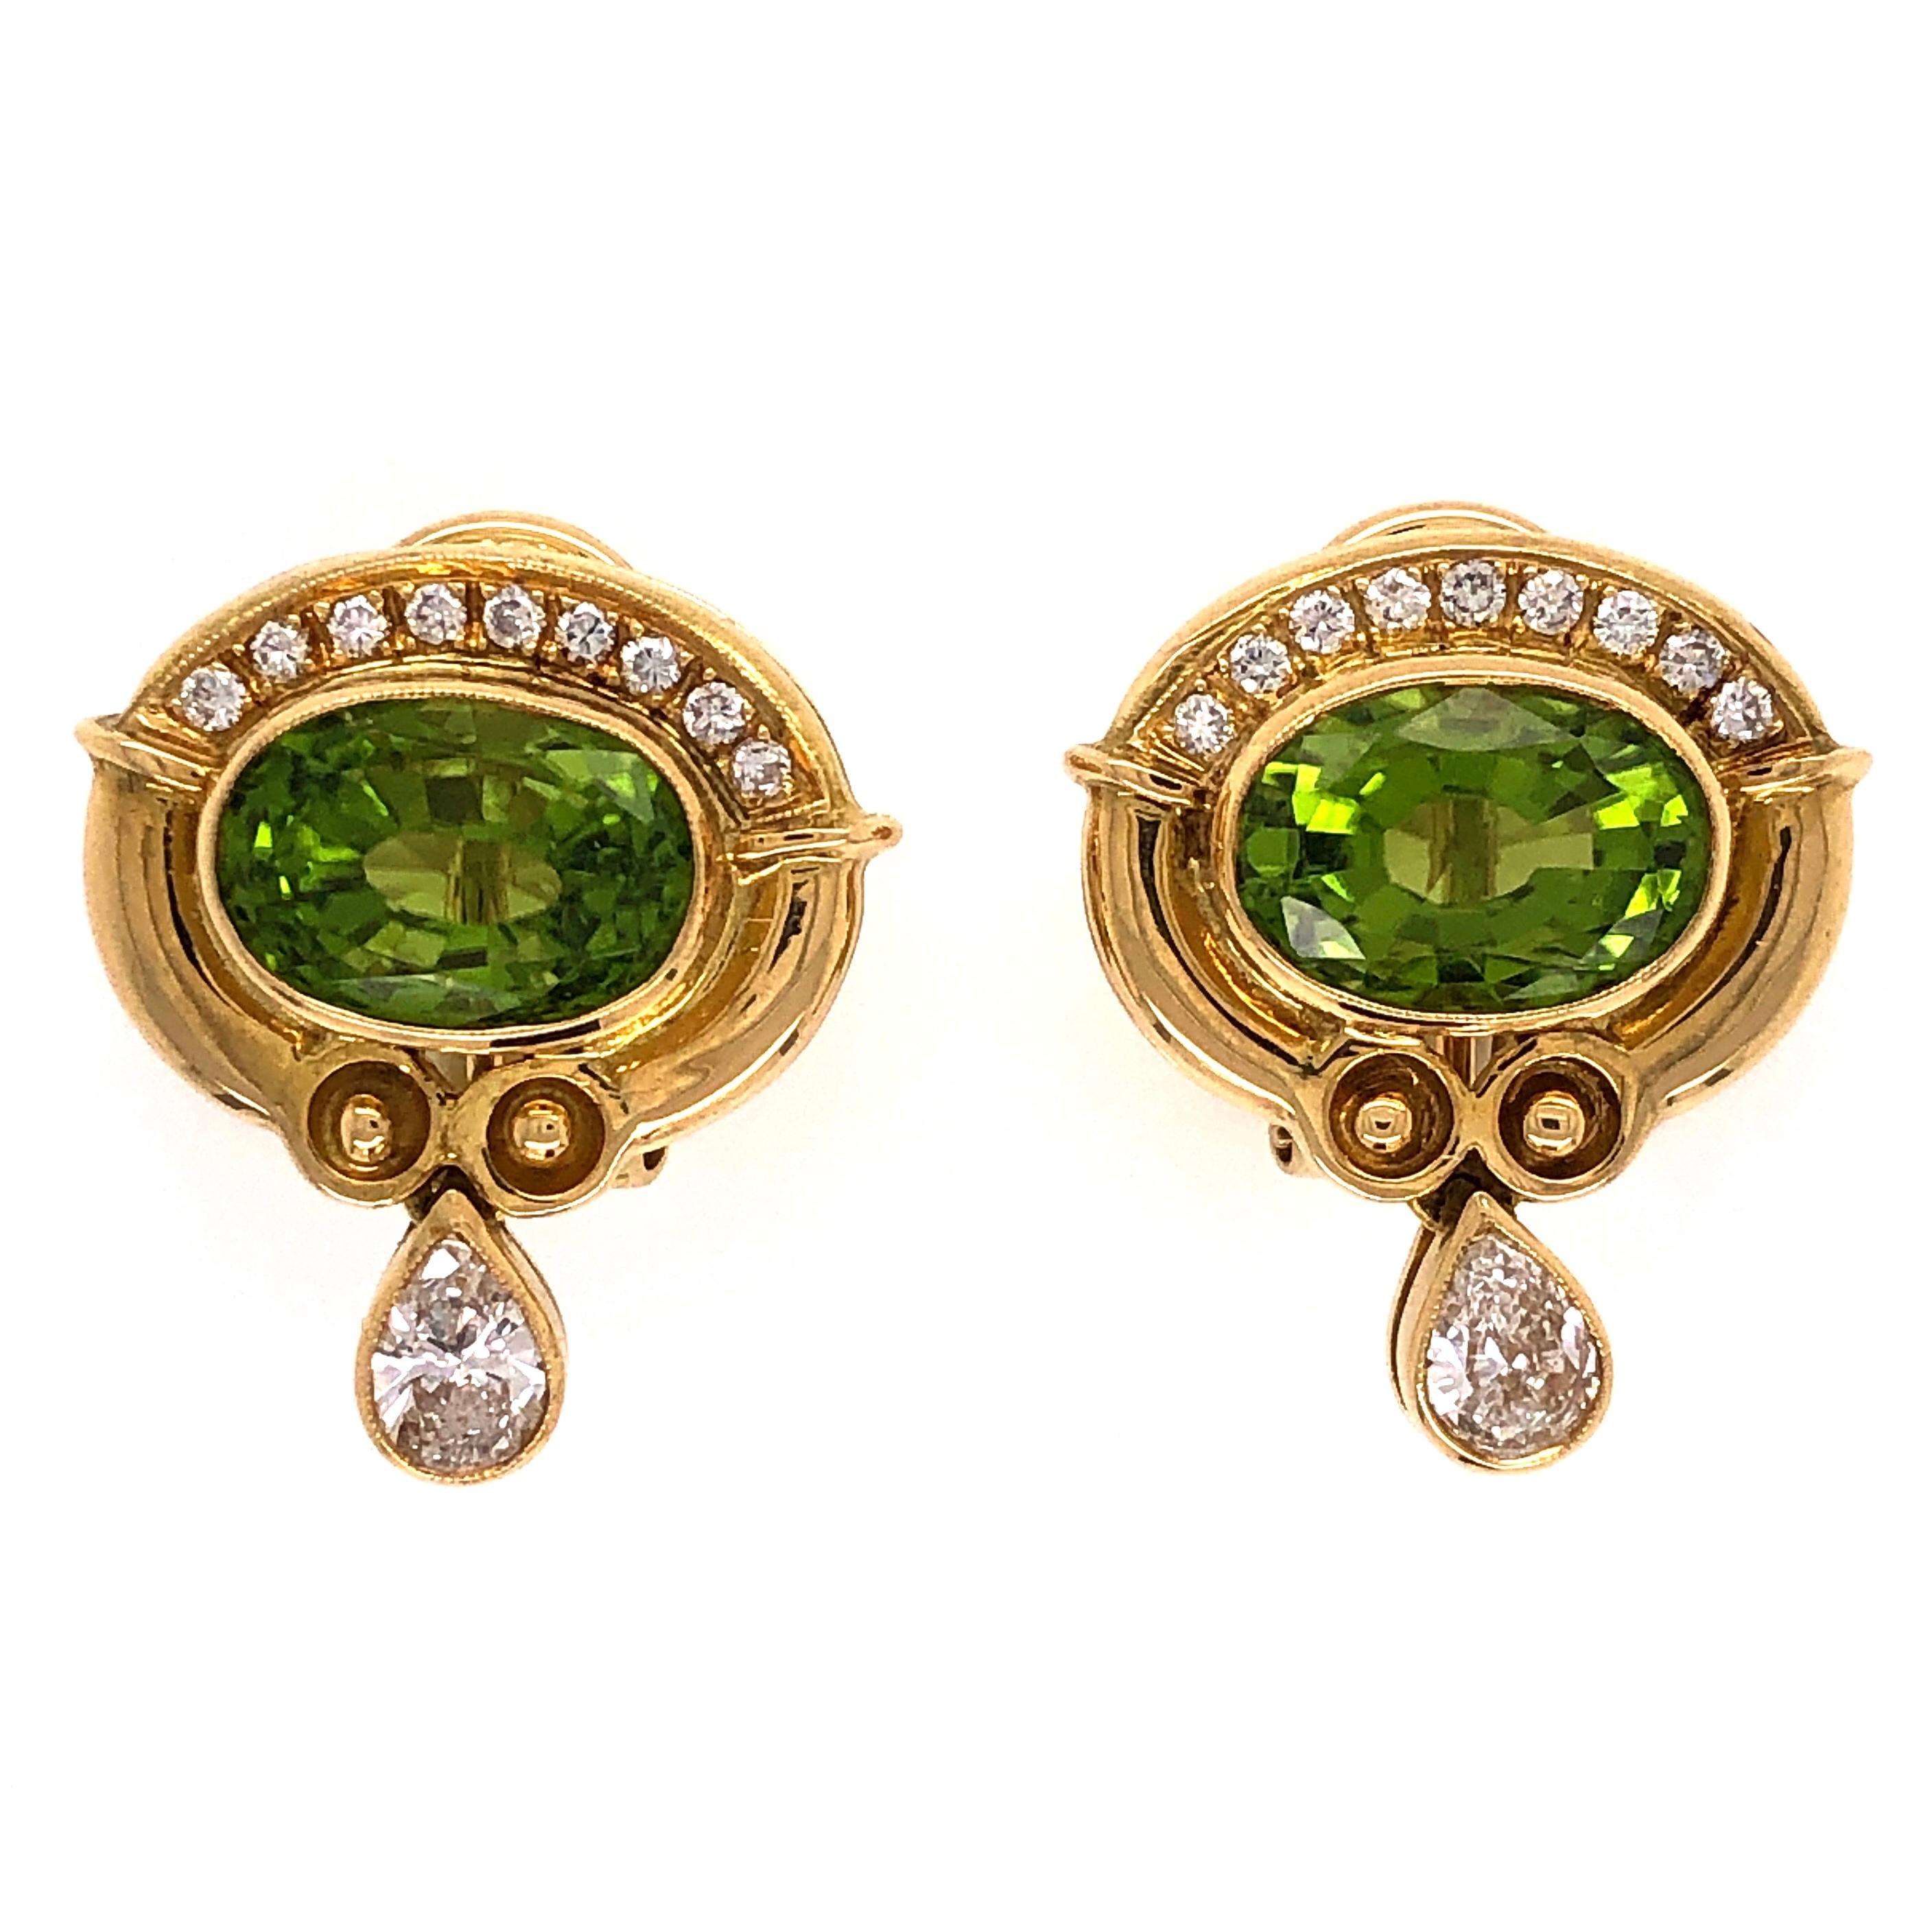 Simply Beautiful and finely detailed Earrings, center securely set with a Peridot, weighing approx. 4.00 Carats and measuring approx. 19mm x 17.4mm, accented by Diamonds, approx. 0.75 total carat weight. Hand crafted 18 Karat yellow Gold handmade